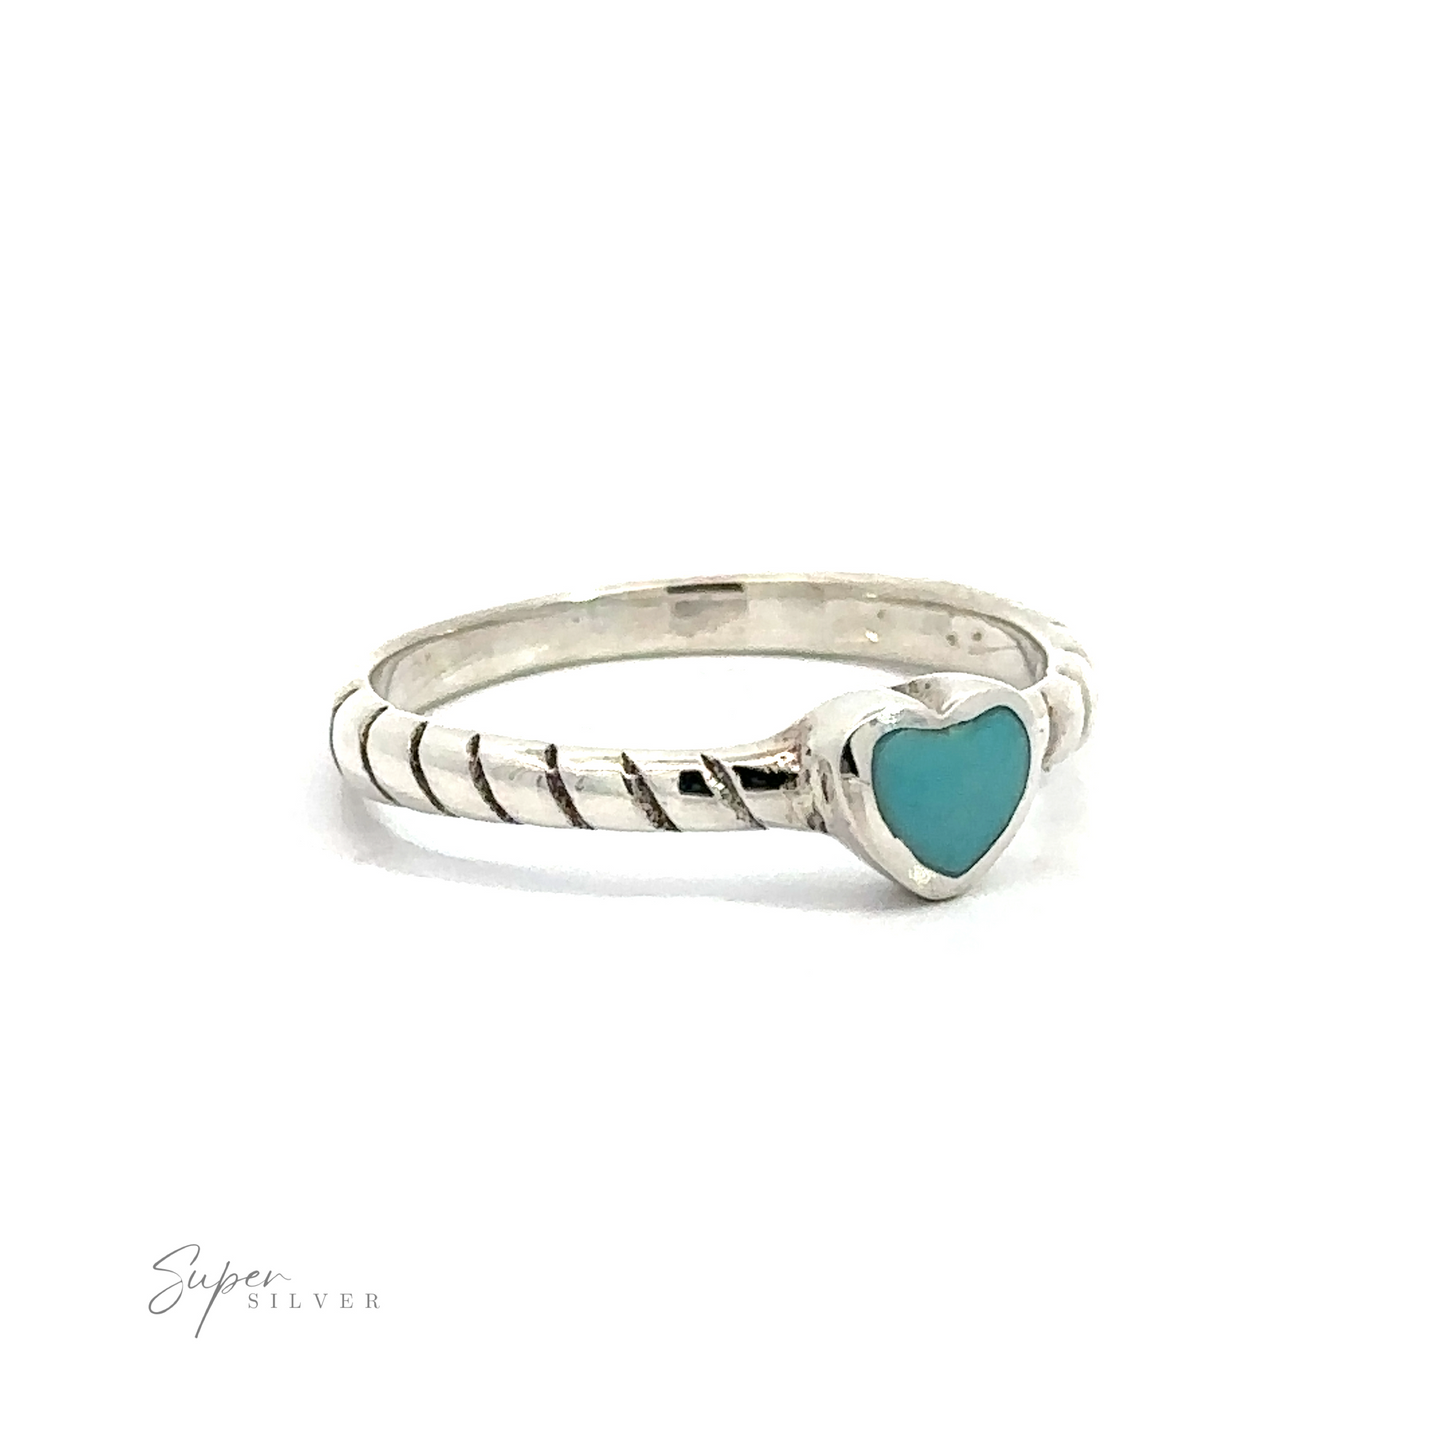 A beautiful sterling silver Turquoise Heart with Braided Band ring.